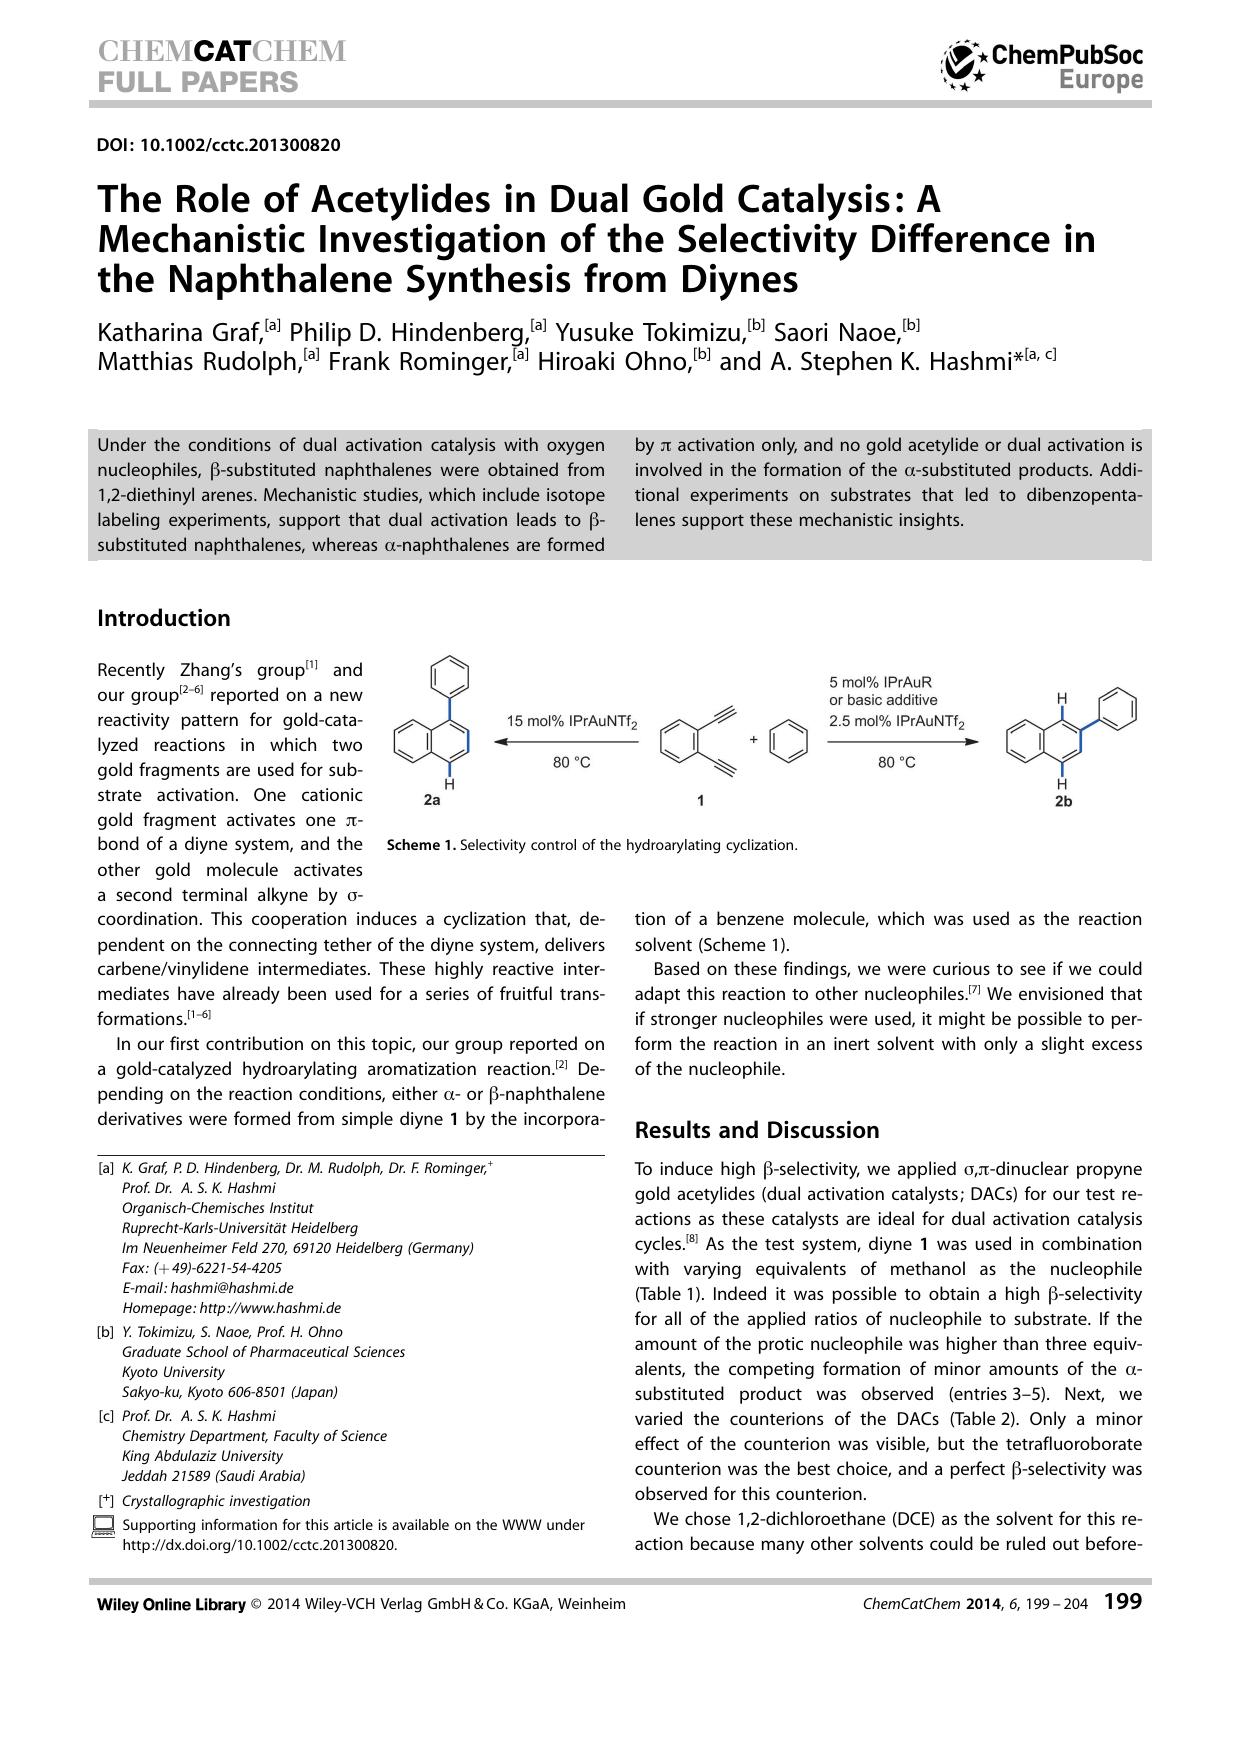 The Role of Acetylides in Dual Gold Catalysis: A Mechanistic Investigation of the Selectivity Difference in the Naphthalene Synthesis from Diynes by Unknown